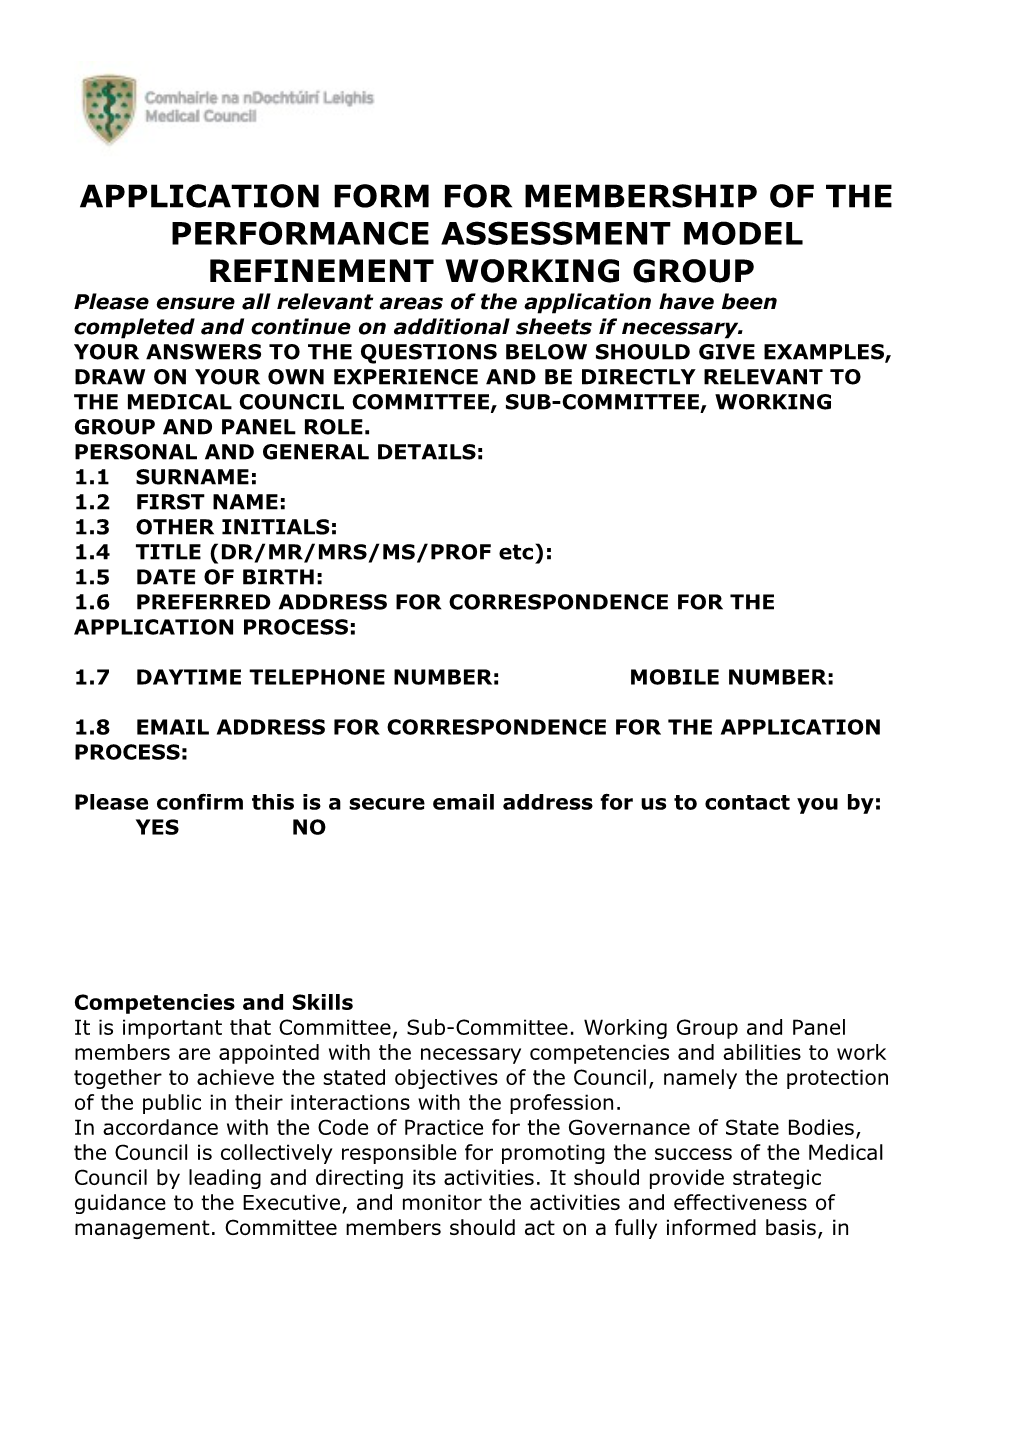 Application Form for Membership of the Performance Assessment Model Refinement Working Group